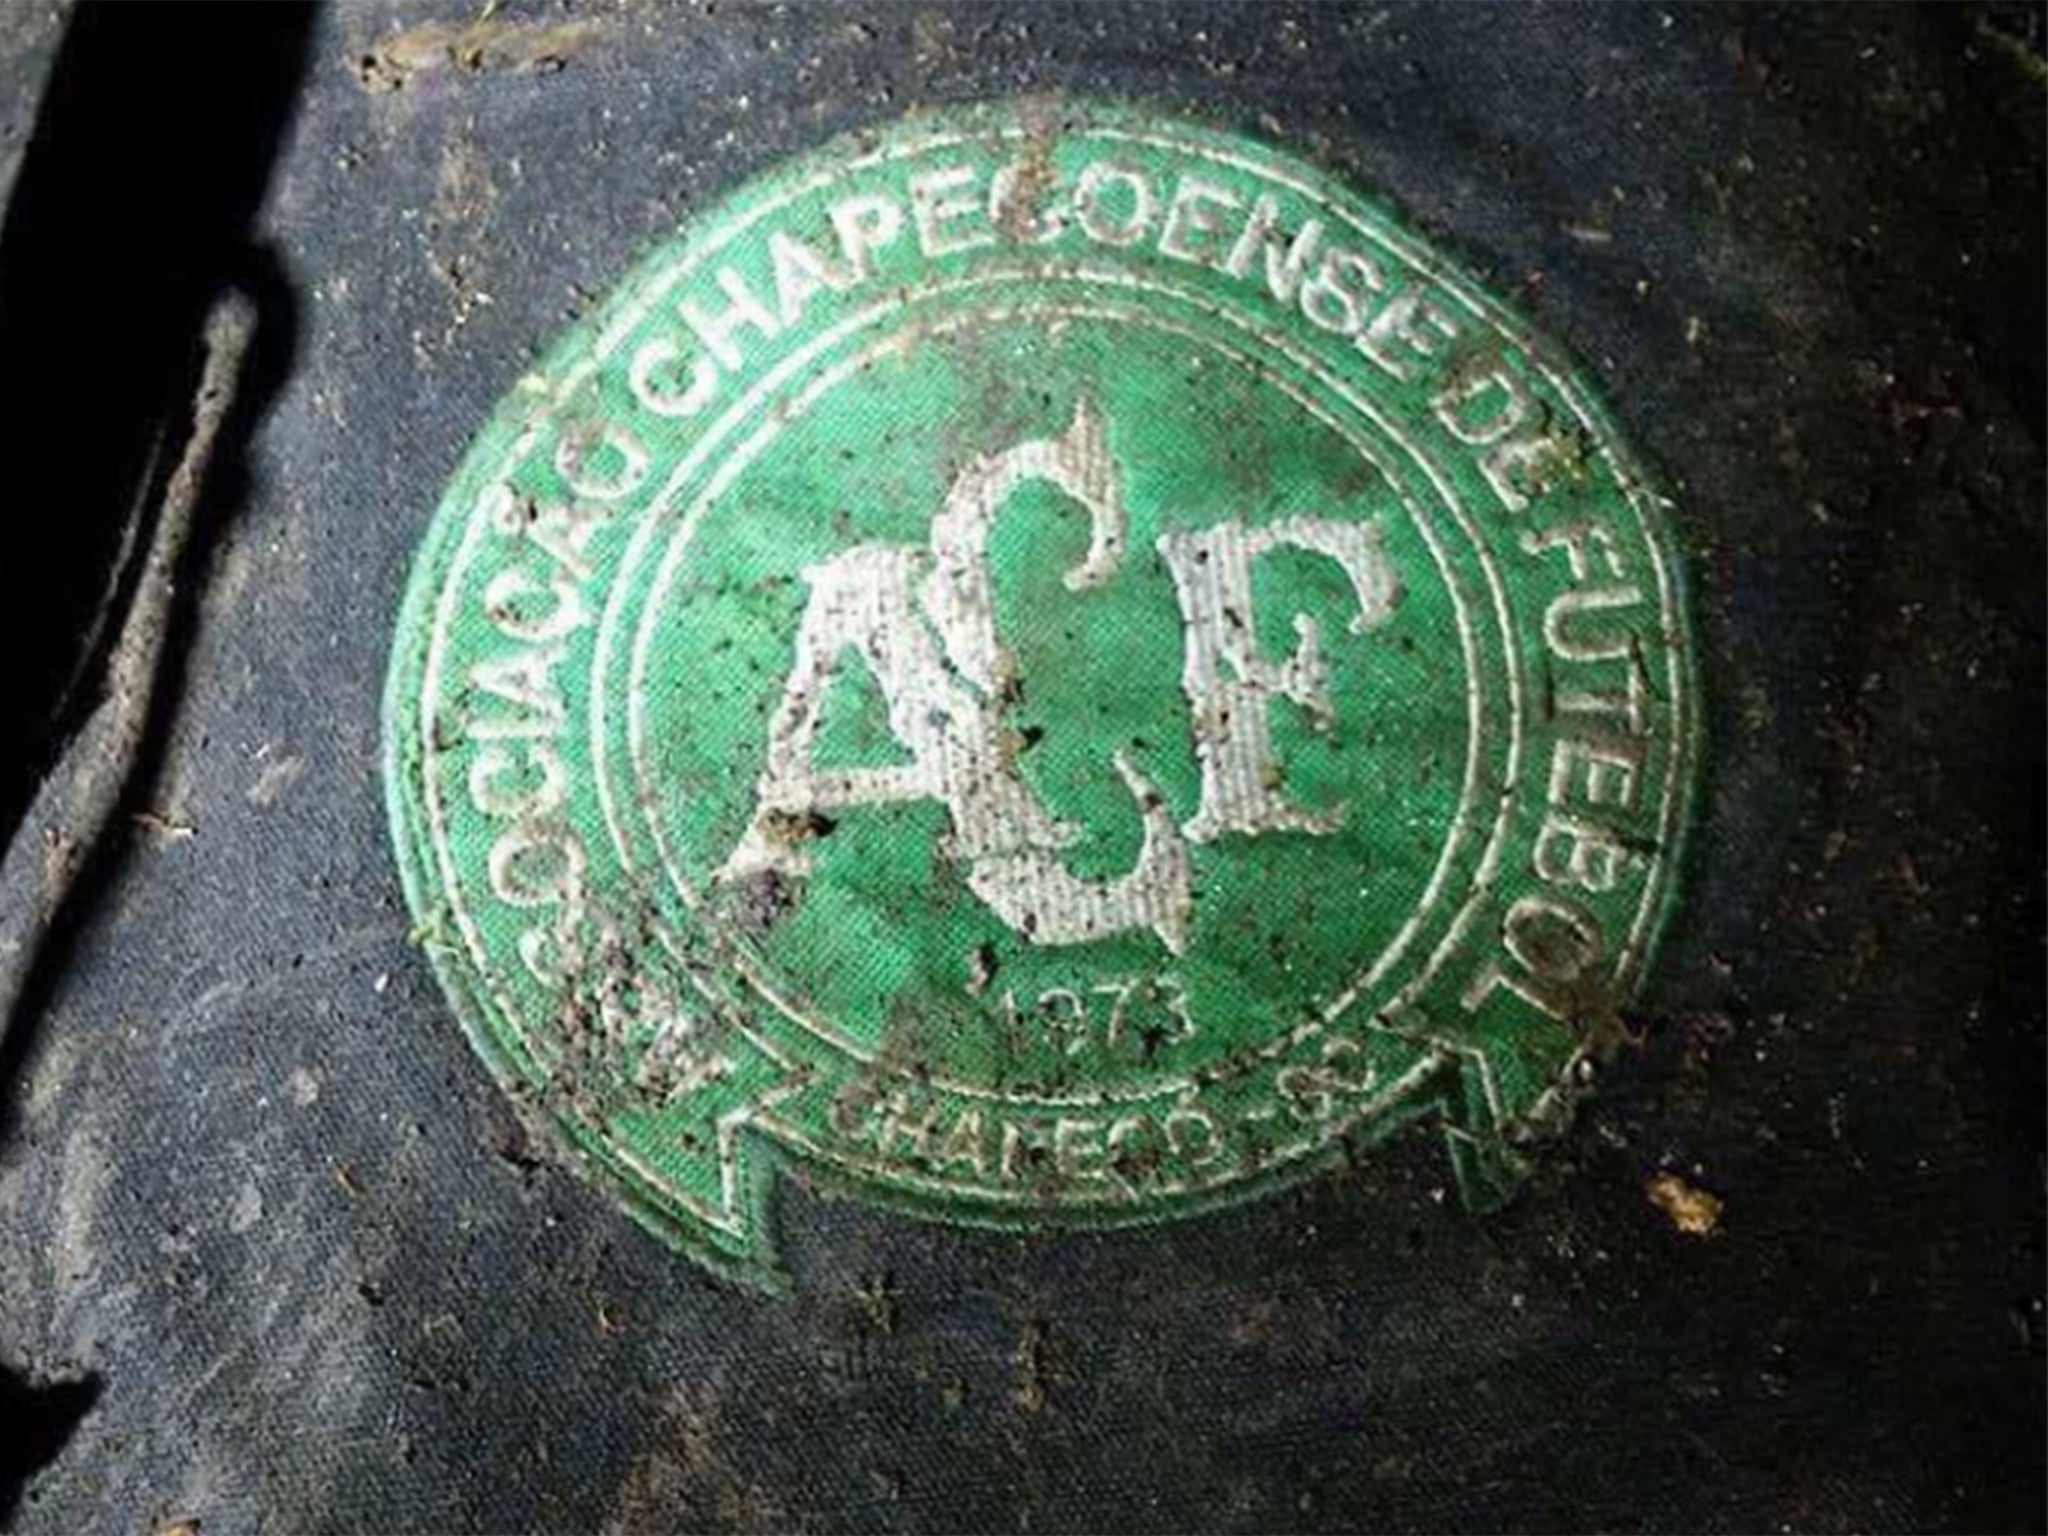 A Chapecoense badge reportedly found at the crash site